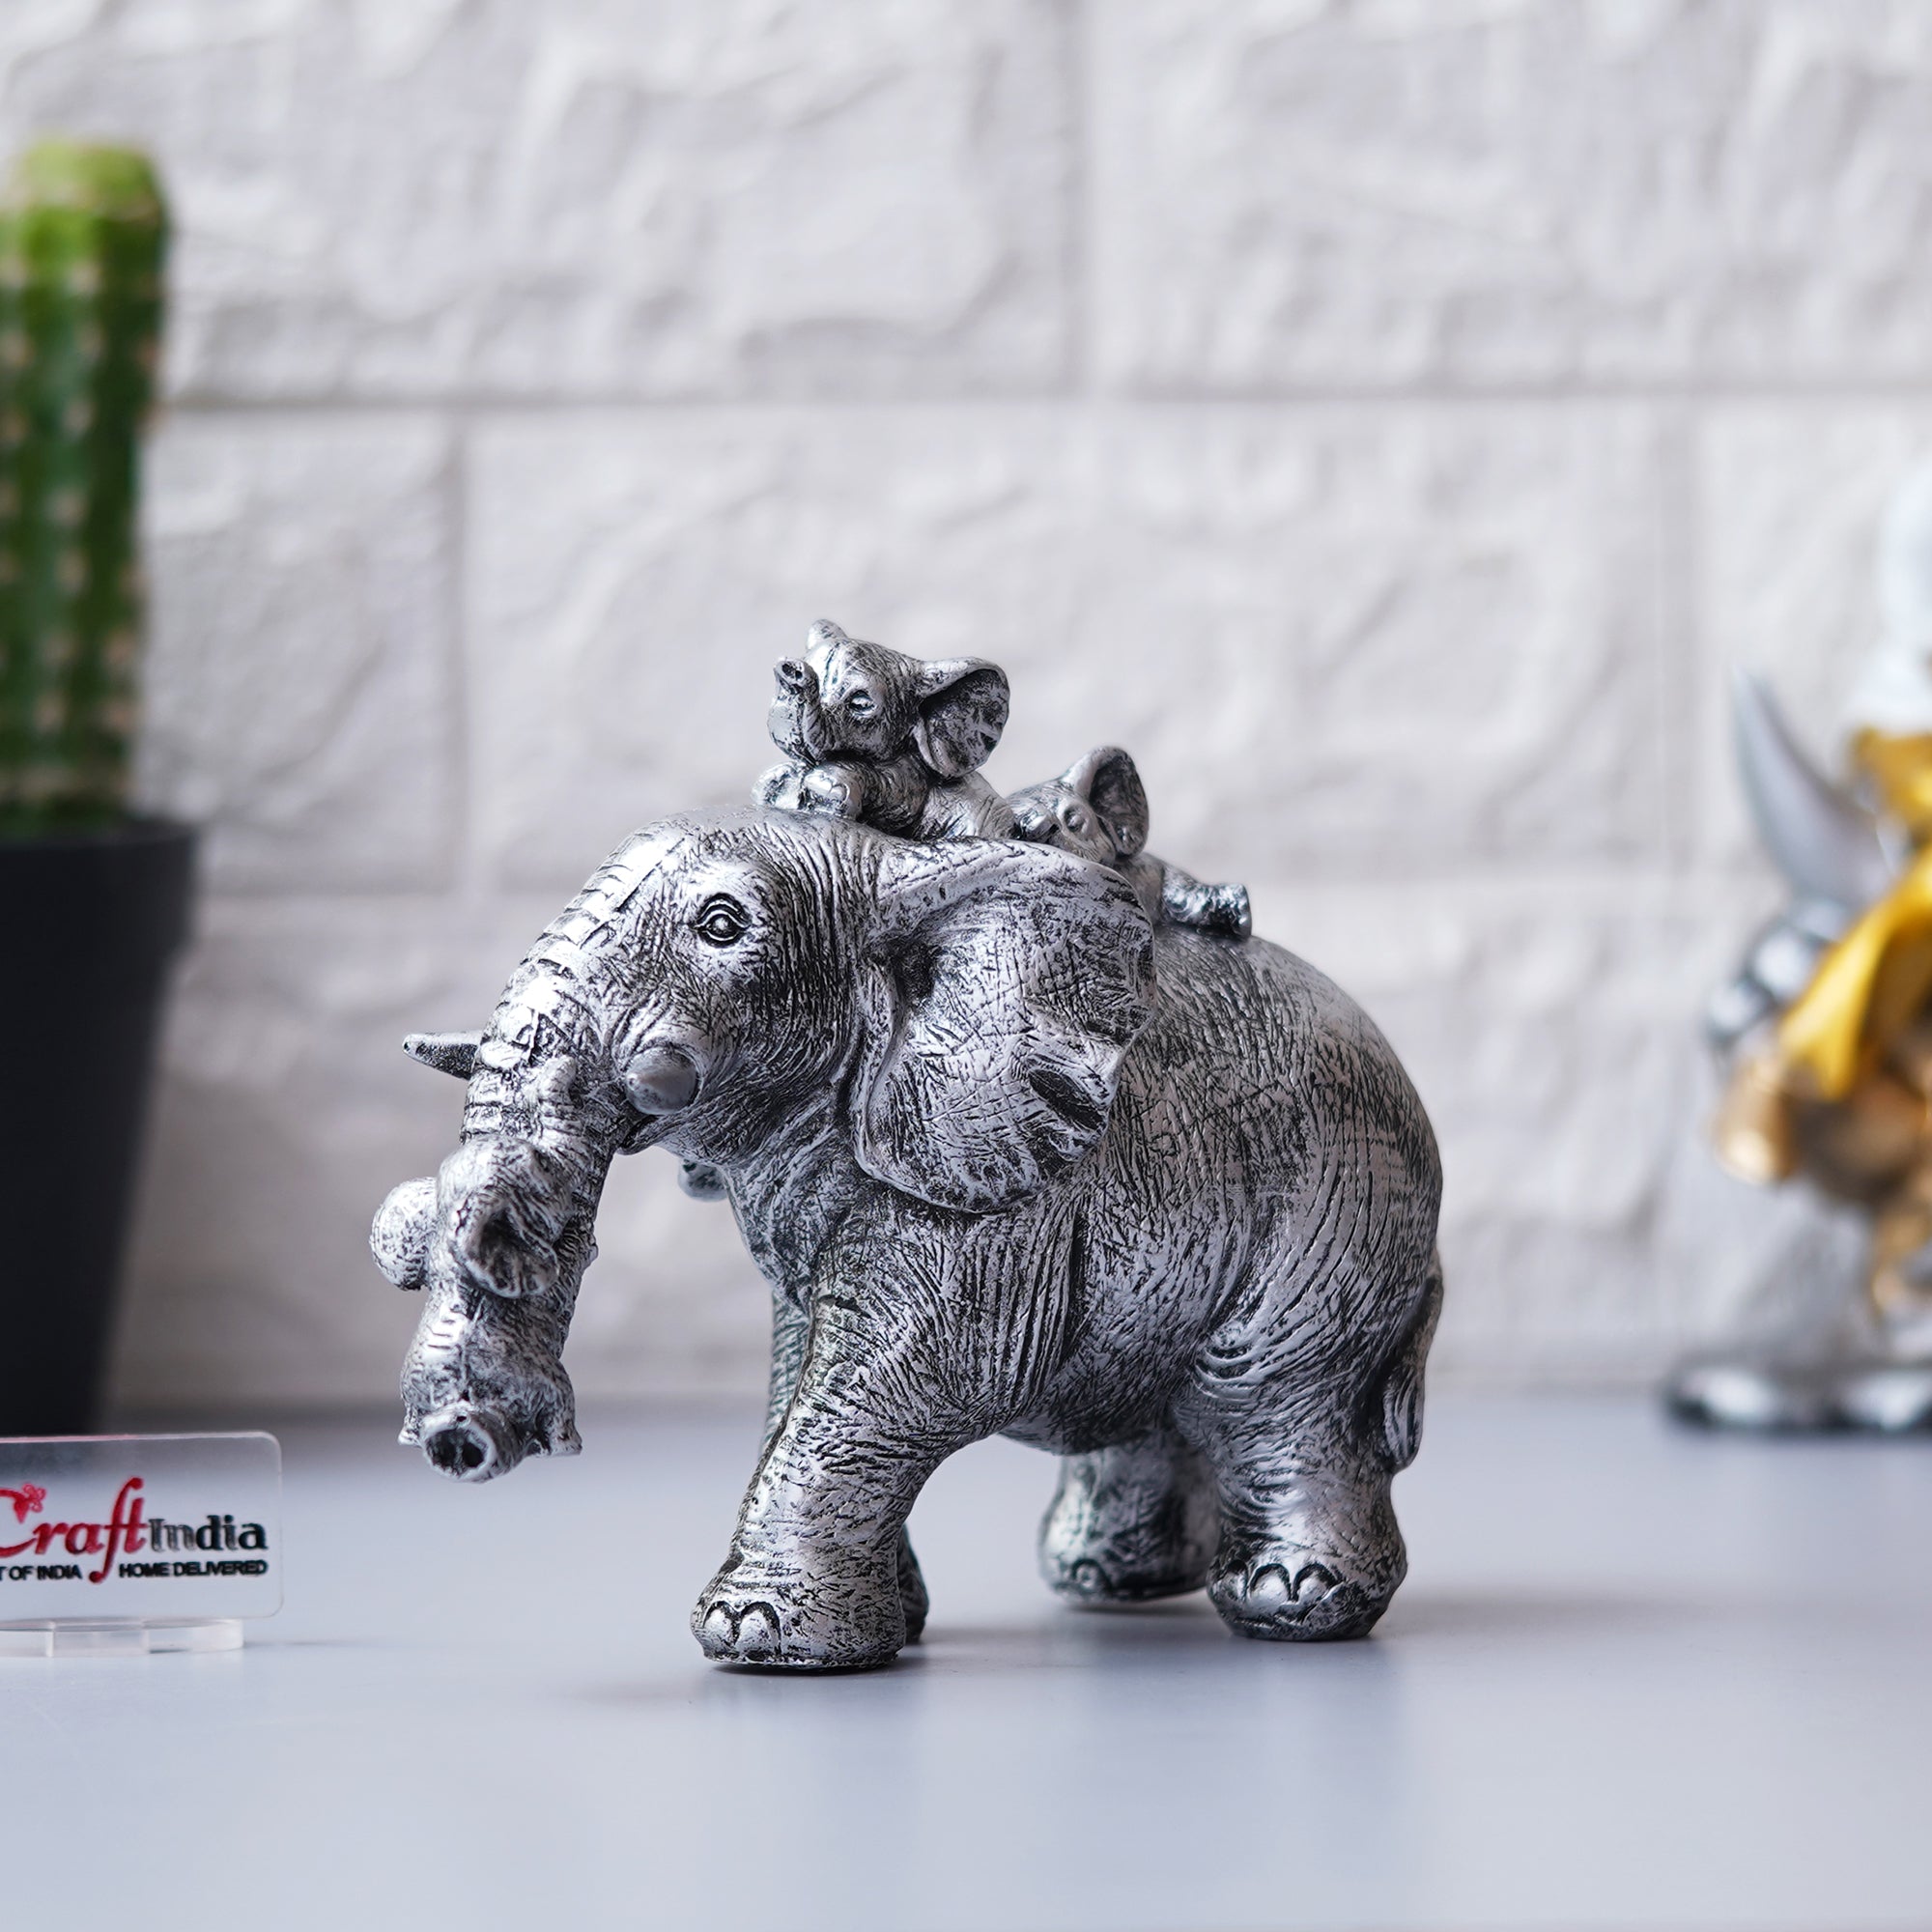 Cute Silver Elephant Statue Carries Three Calves on Its Back and Trunk 5